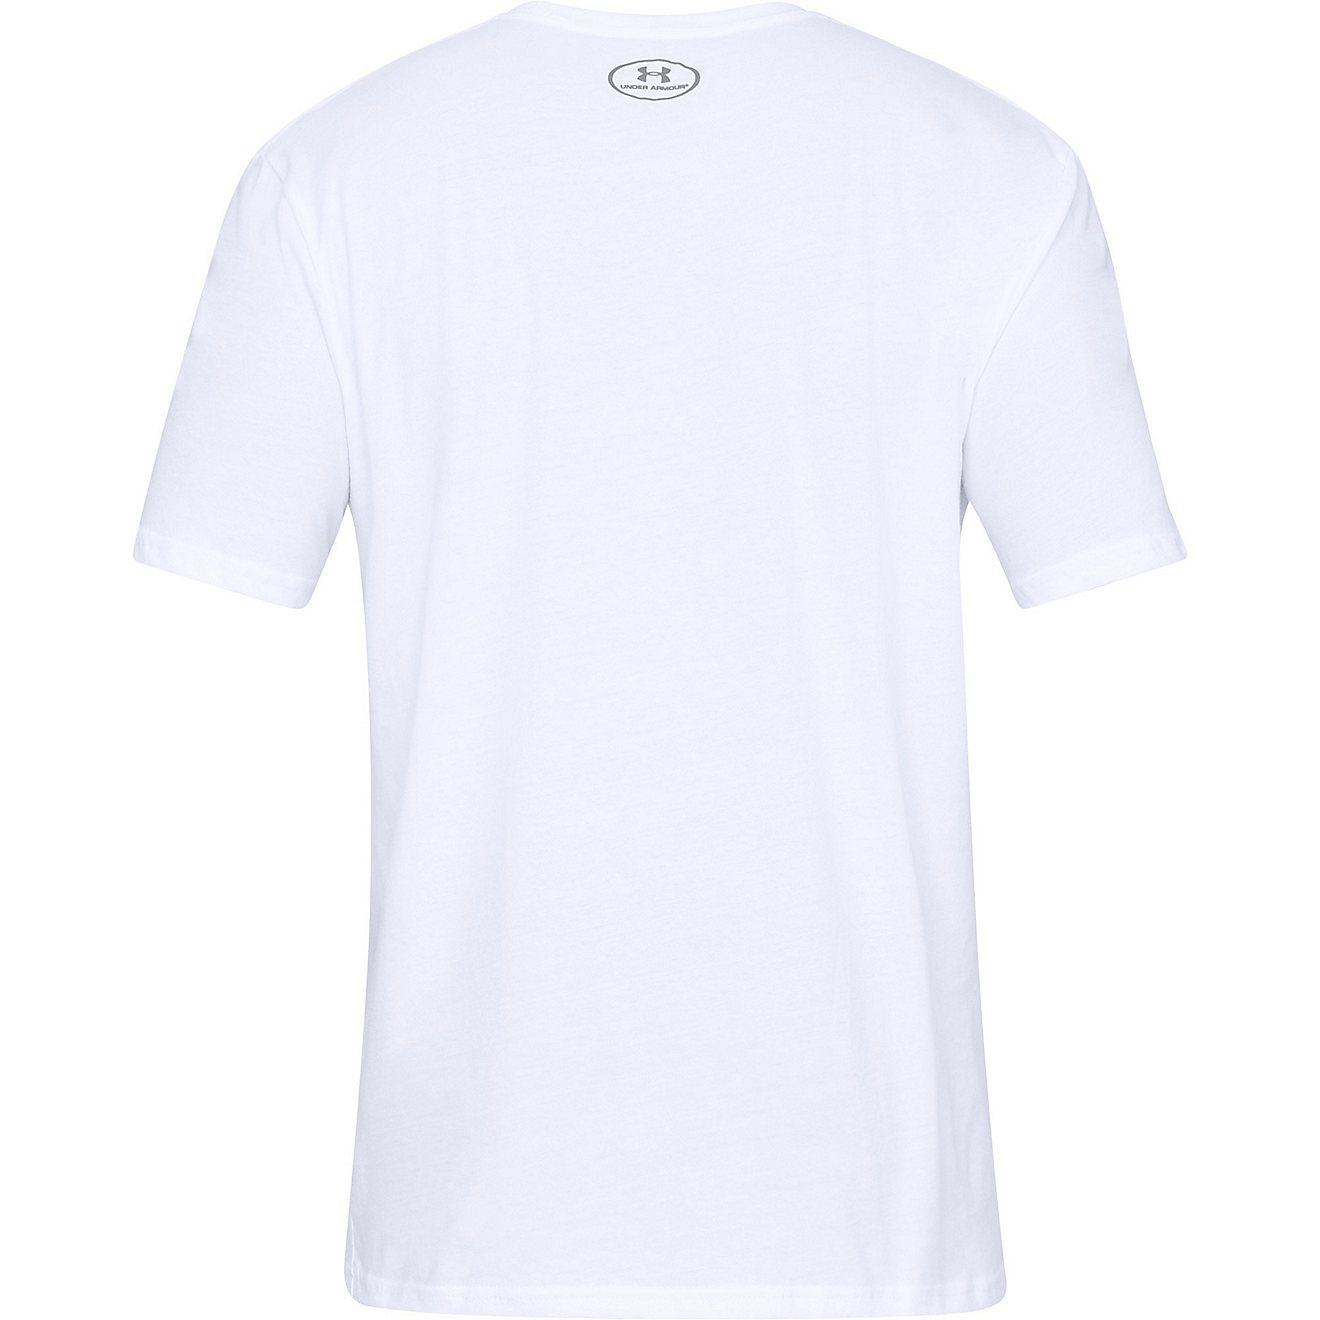 Under Armour Baseball Shine T-shirt                                                                                              - view number 4